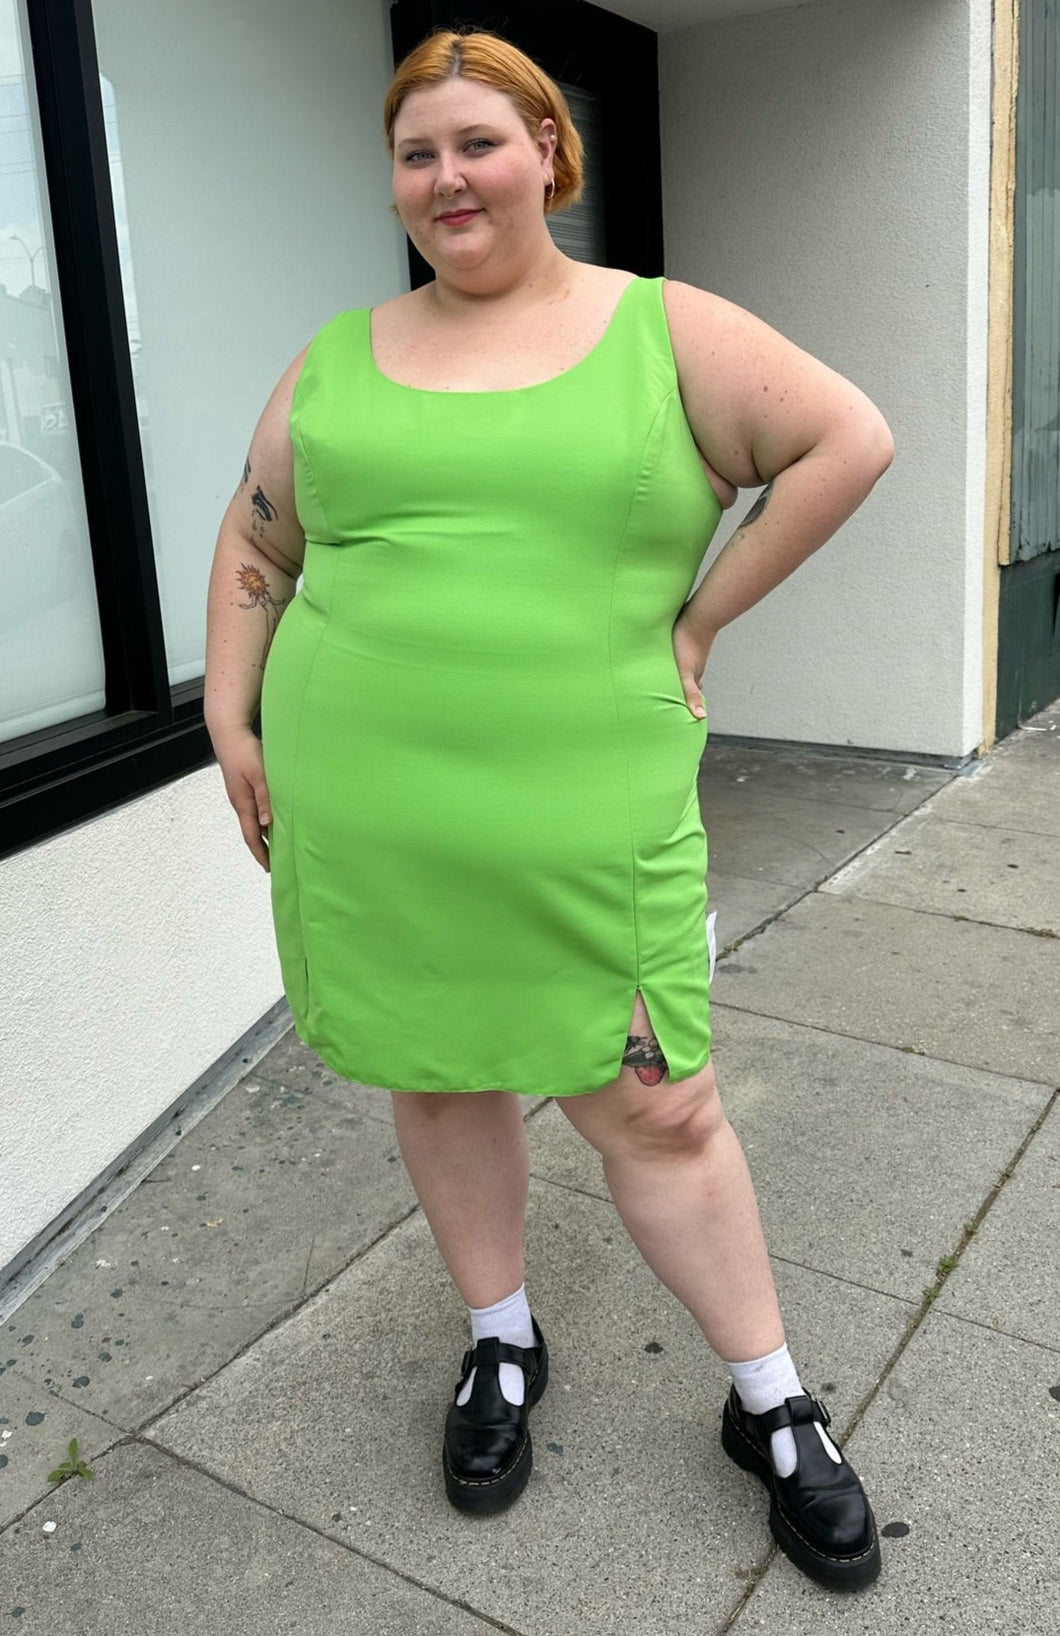 Full-body front view of a size 24 ASOS lime green mini sheath dress with a small slit at the hem styled with black mary janes on a size 22/24 model. The photo is taken outside in natural lighting.